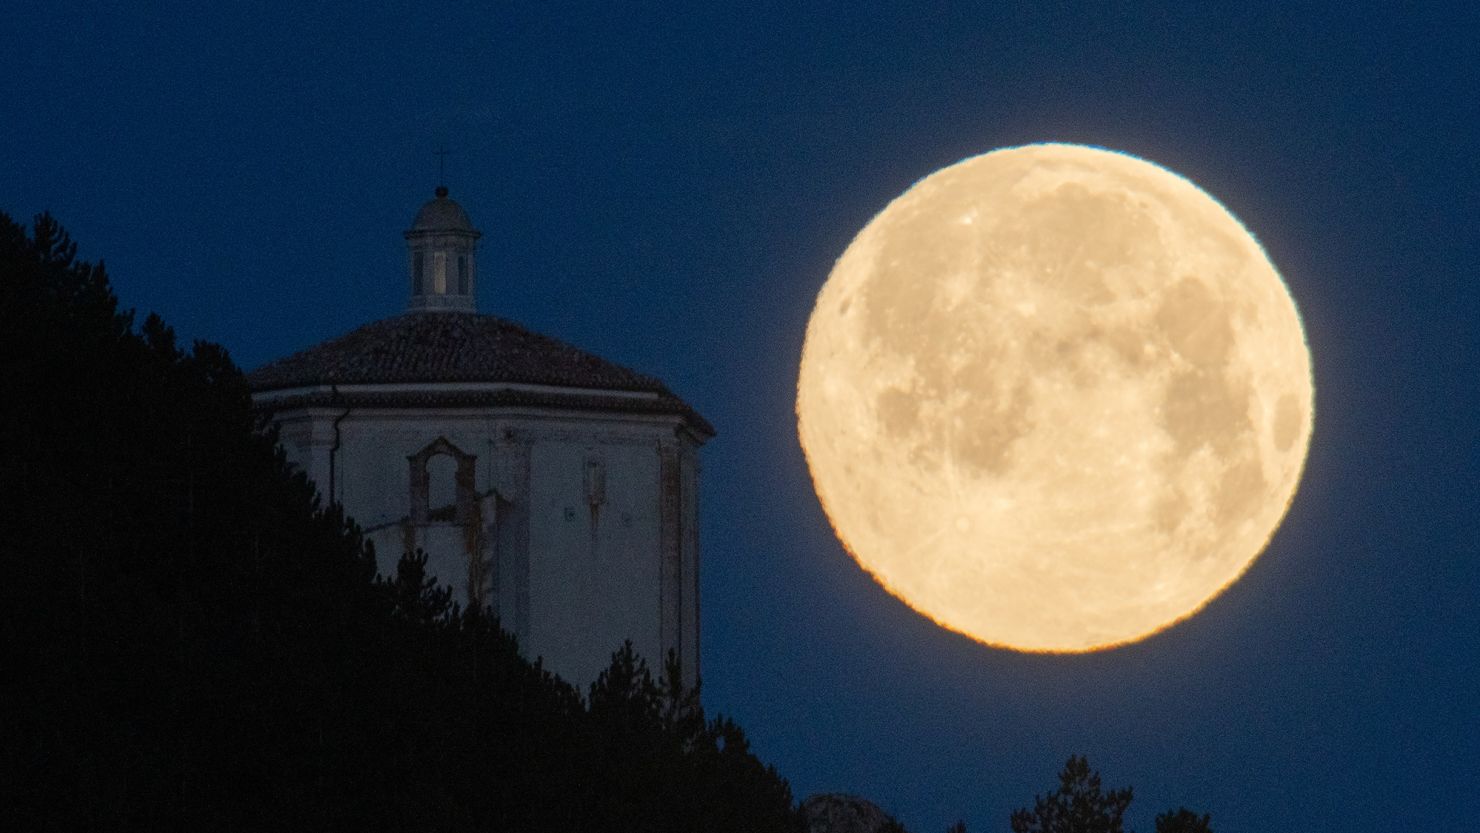 Nicknamed the snow moon, the golden orb will appear almost like any ordinary full moon. Here, the snow moon looms in the sky over Abruzzo, Italy, in February 2022.